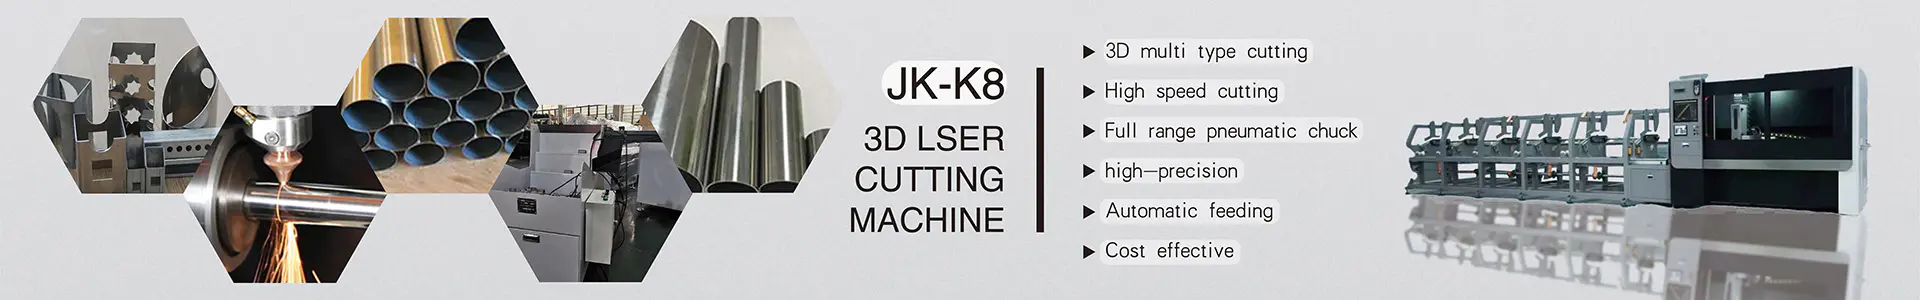 Main features of laser tube cutting machine